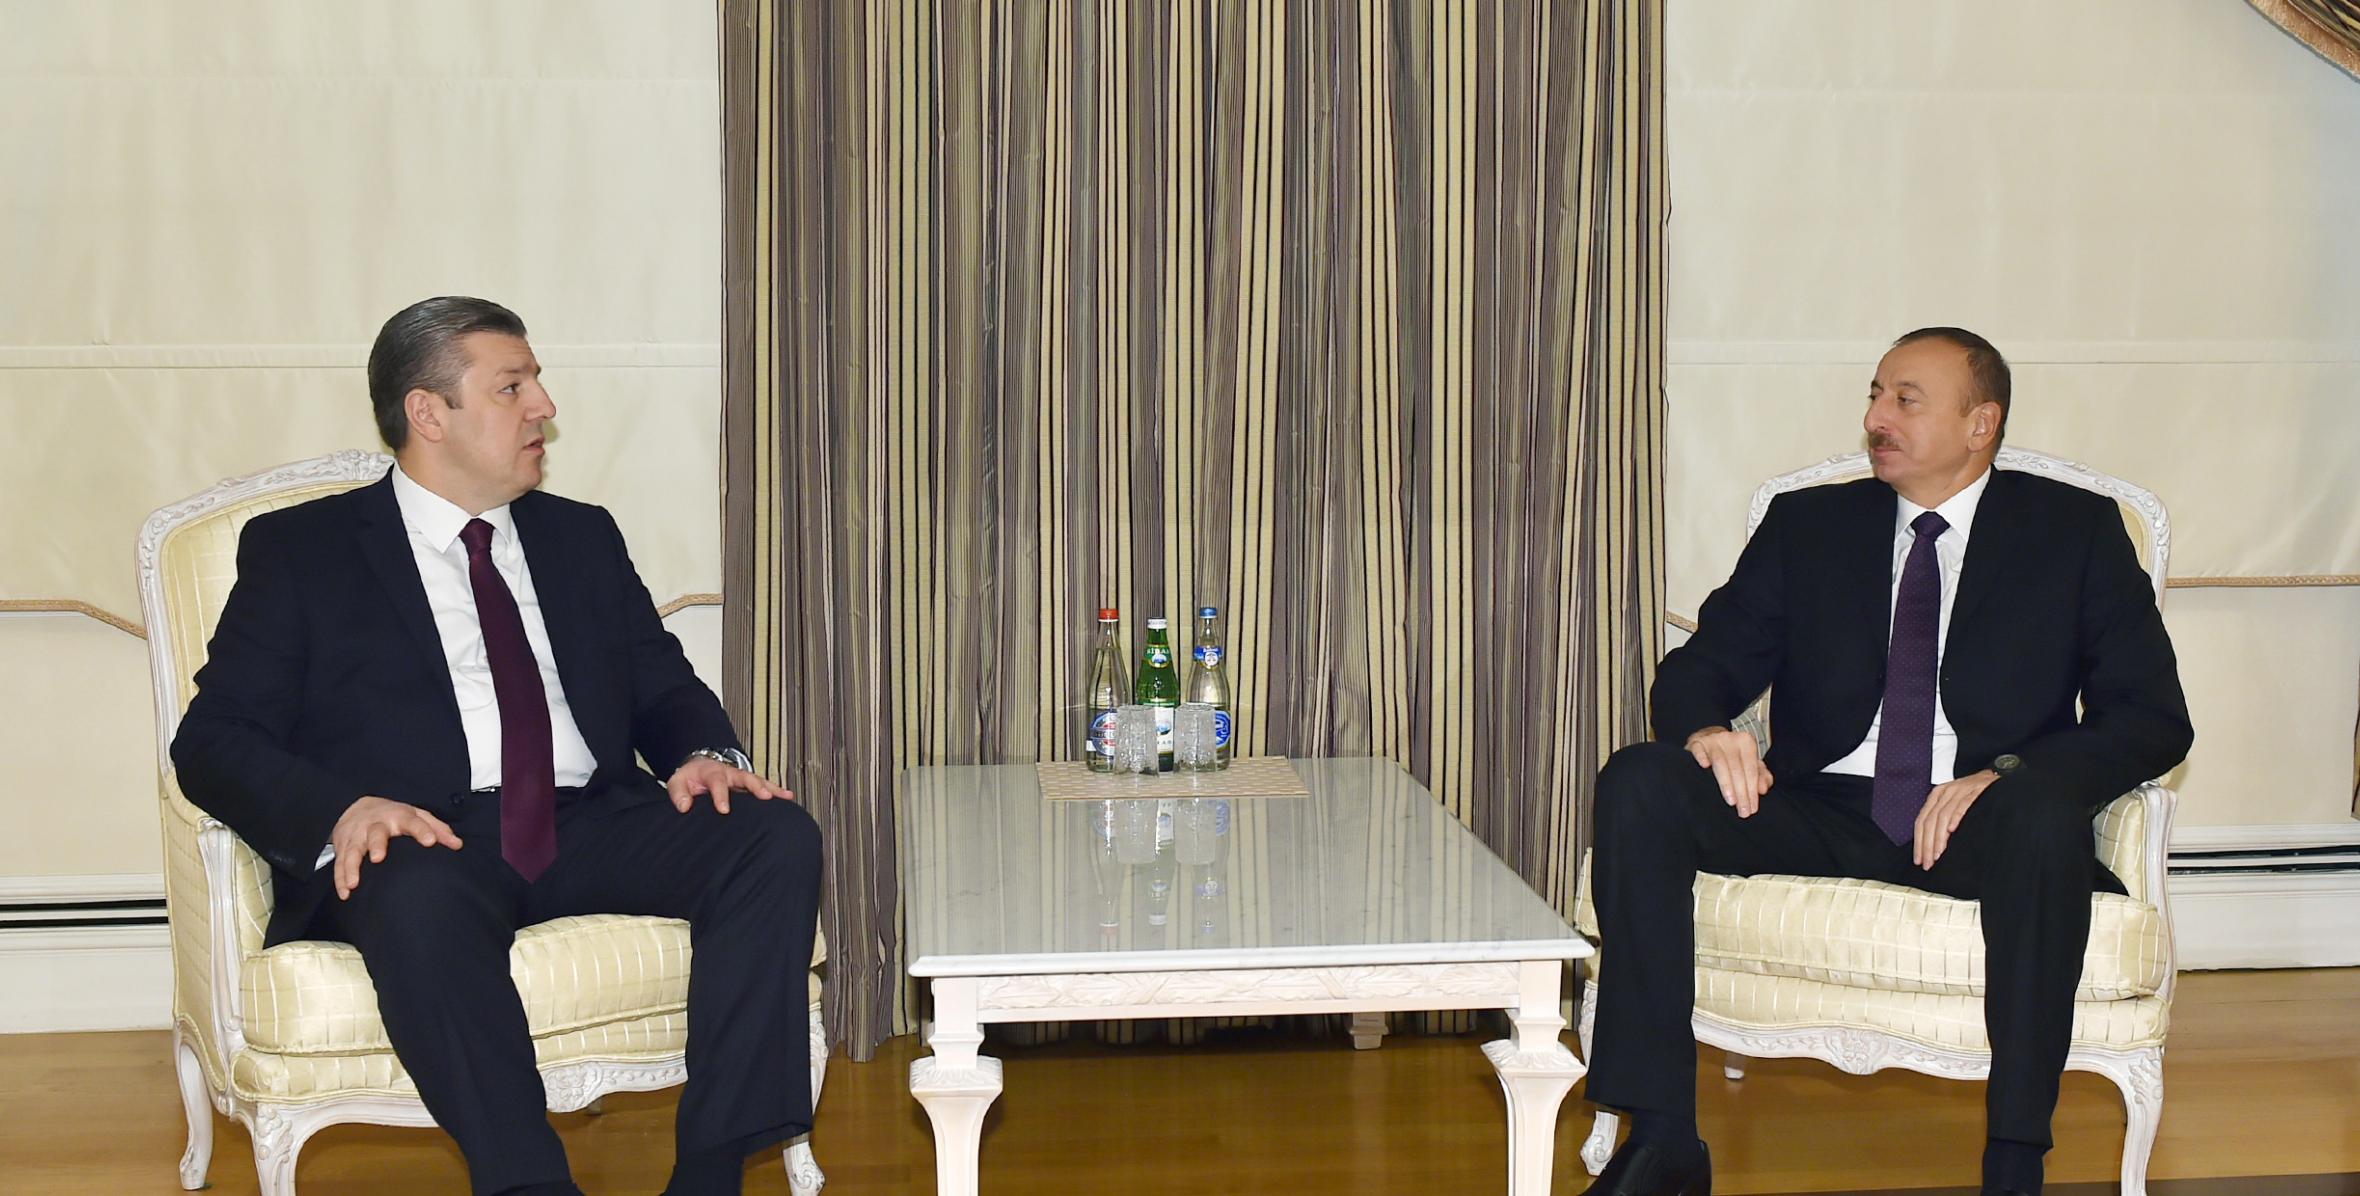 Ilham Aliyev received the Vice Prime Minister, Foreign Minister of Georgia